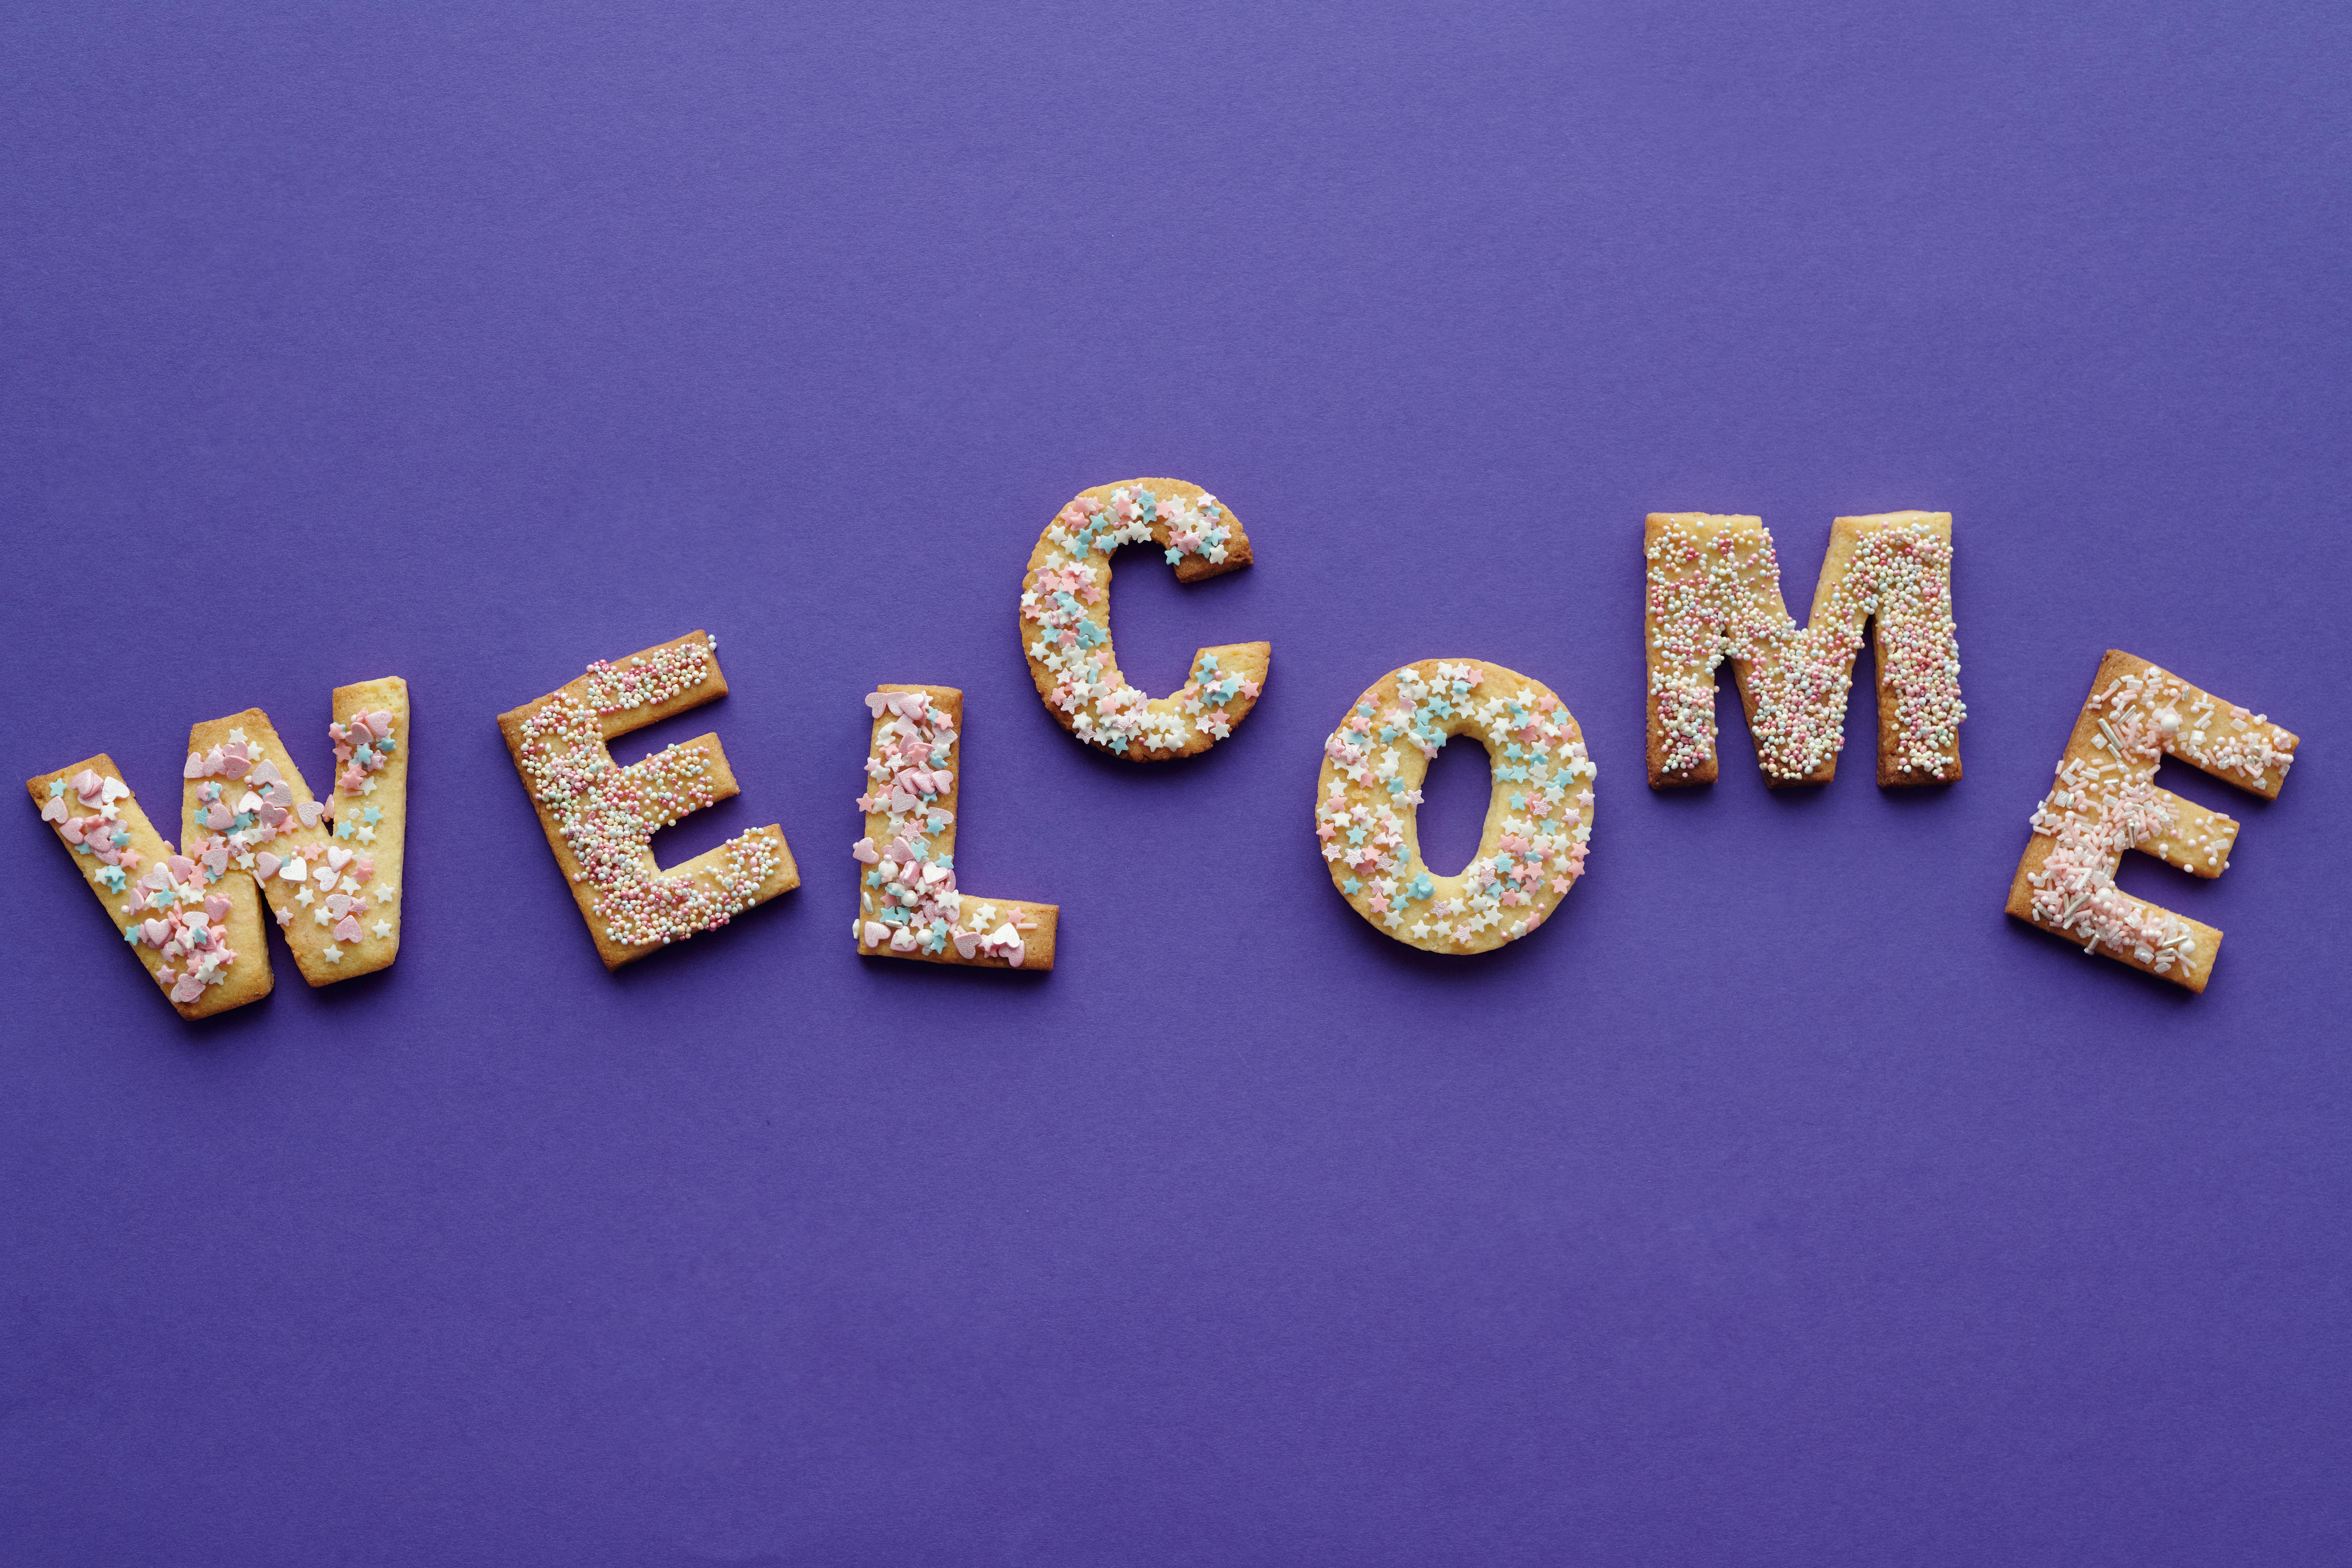 578561 Welcome Background Images Stock Photos  Vectors  Shutterstock